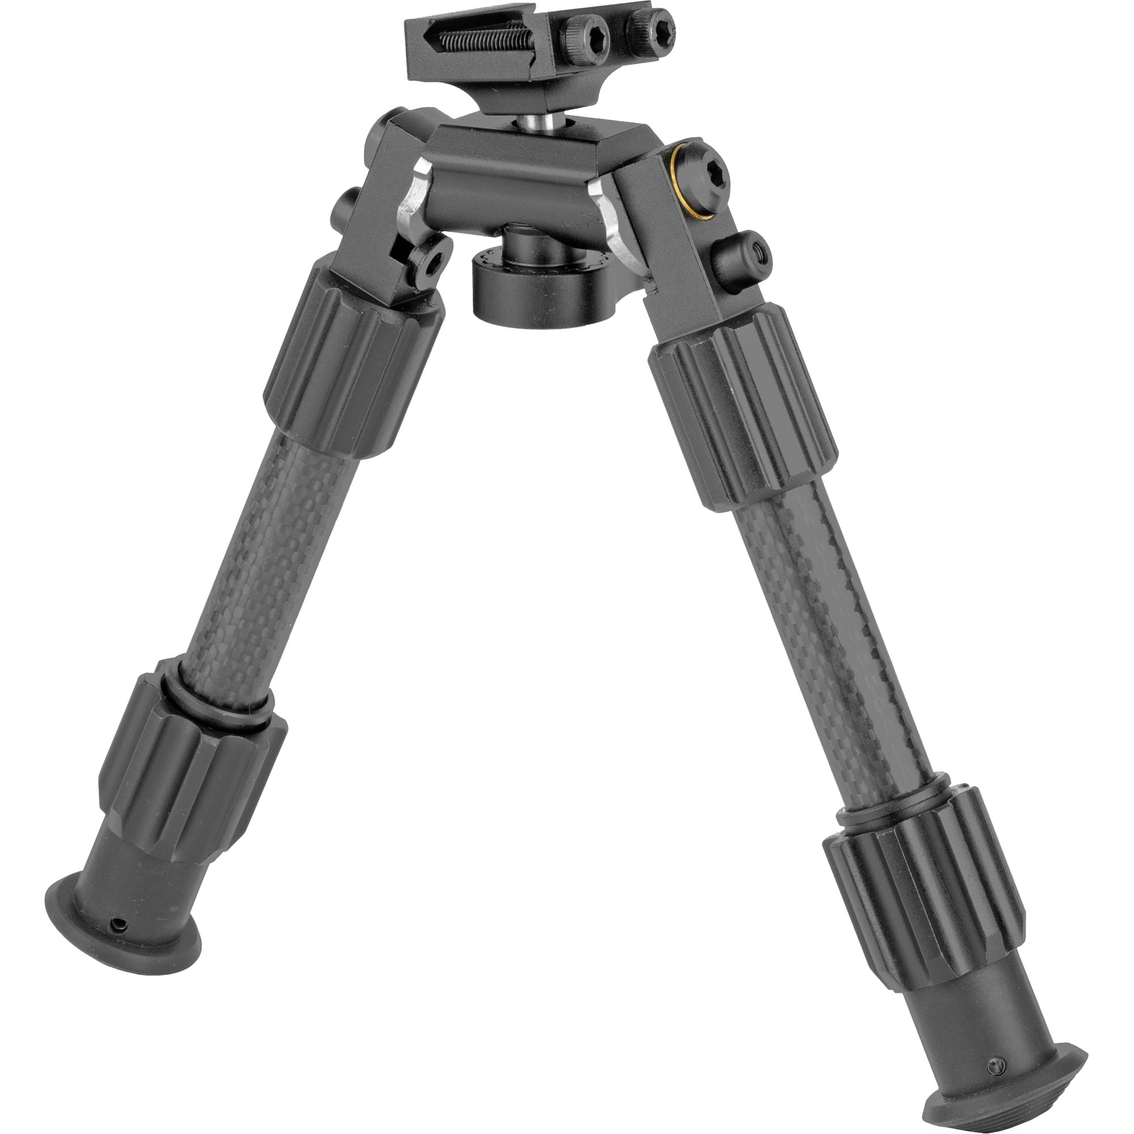 Tru Glo GSM Tac Pod Bipod 6 to 9 In. Fits Picatinny, Black - Image 3 of 3